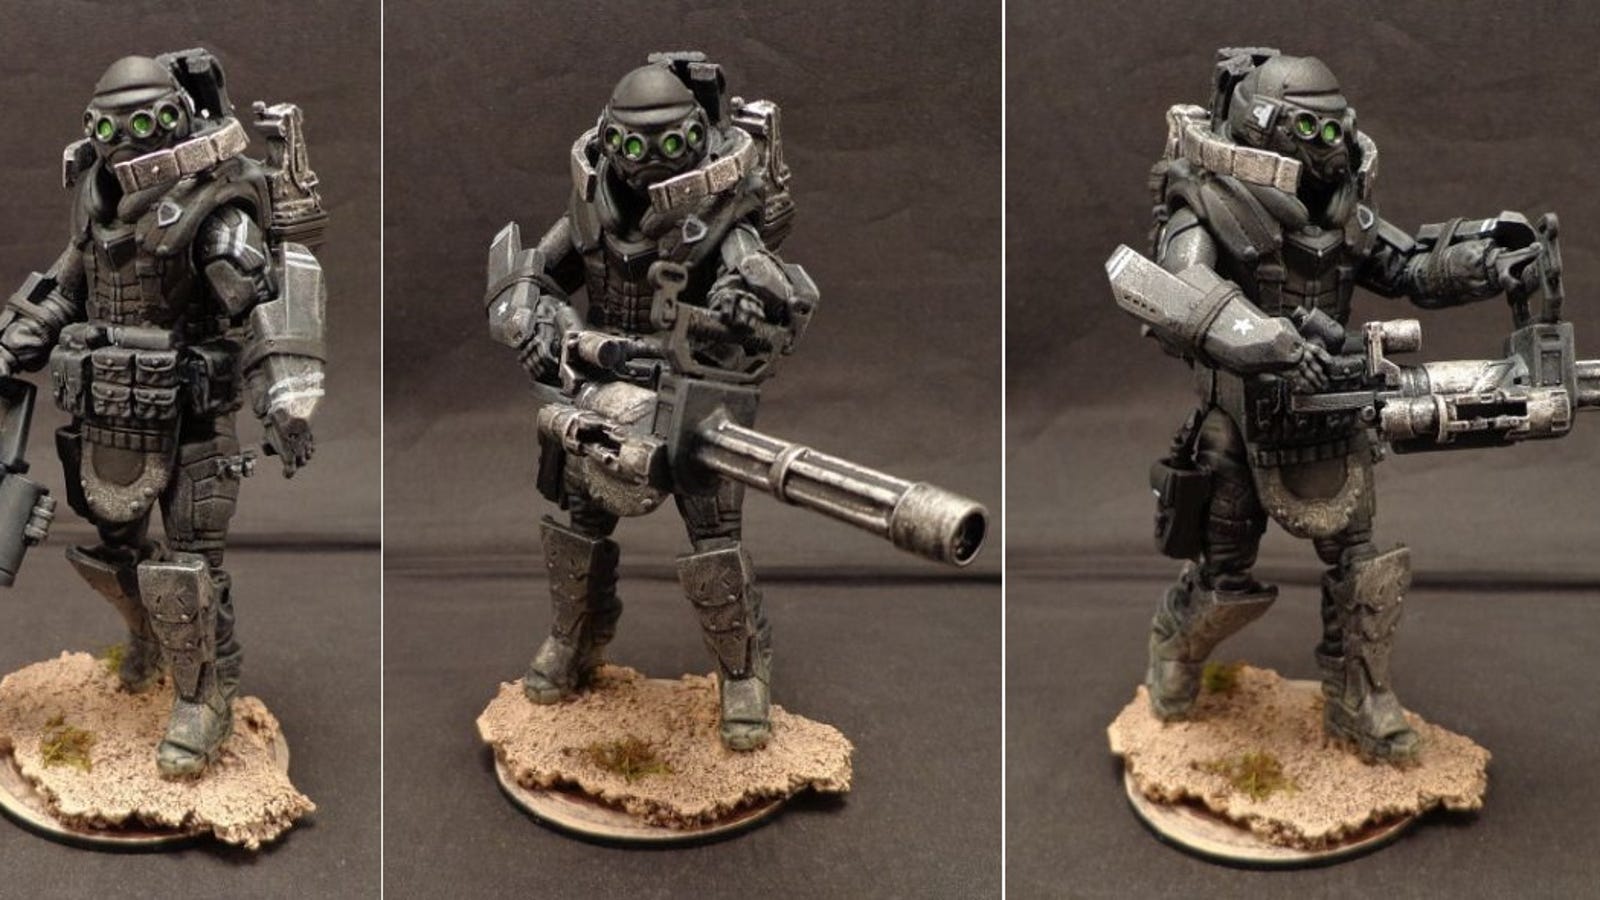 Call Of Duty Ghosts: Custom Action Figures1600 x 900